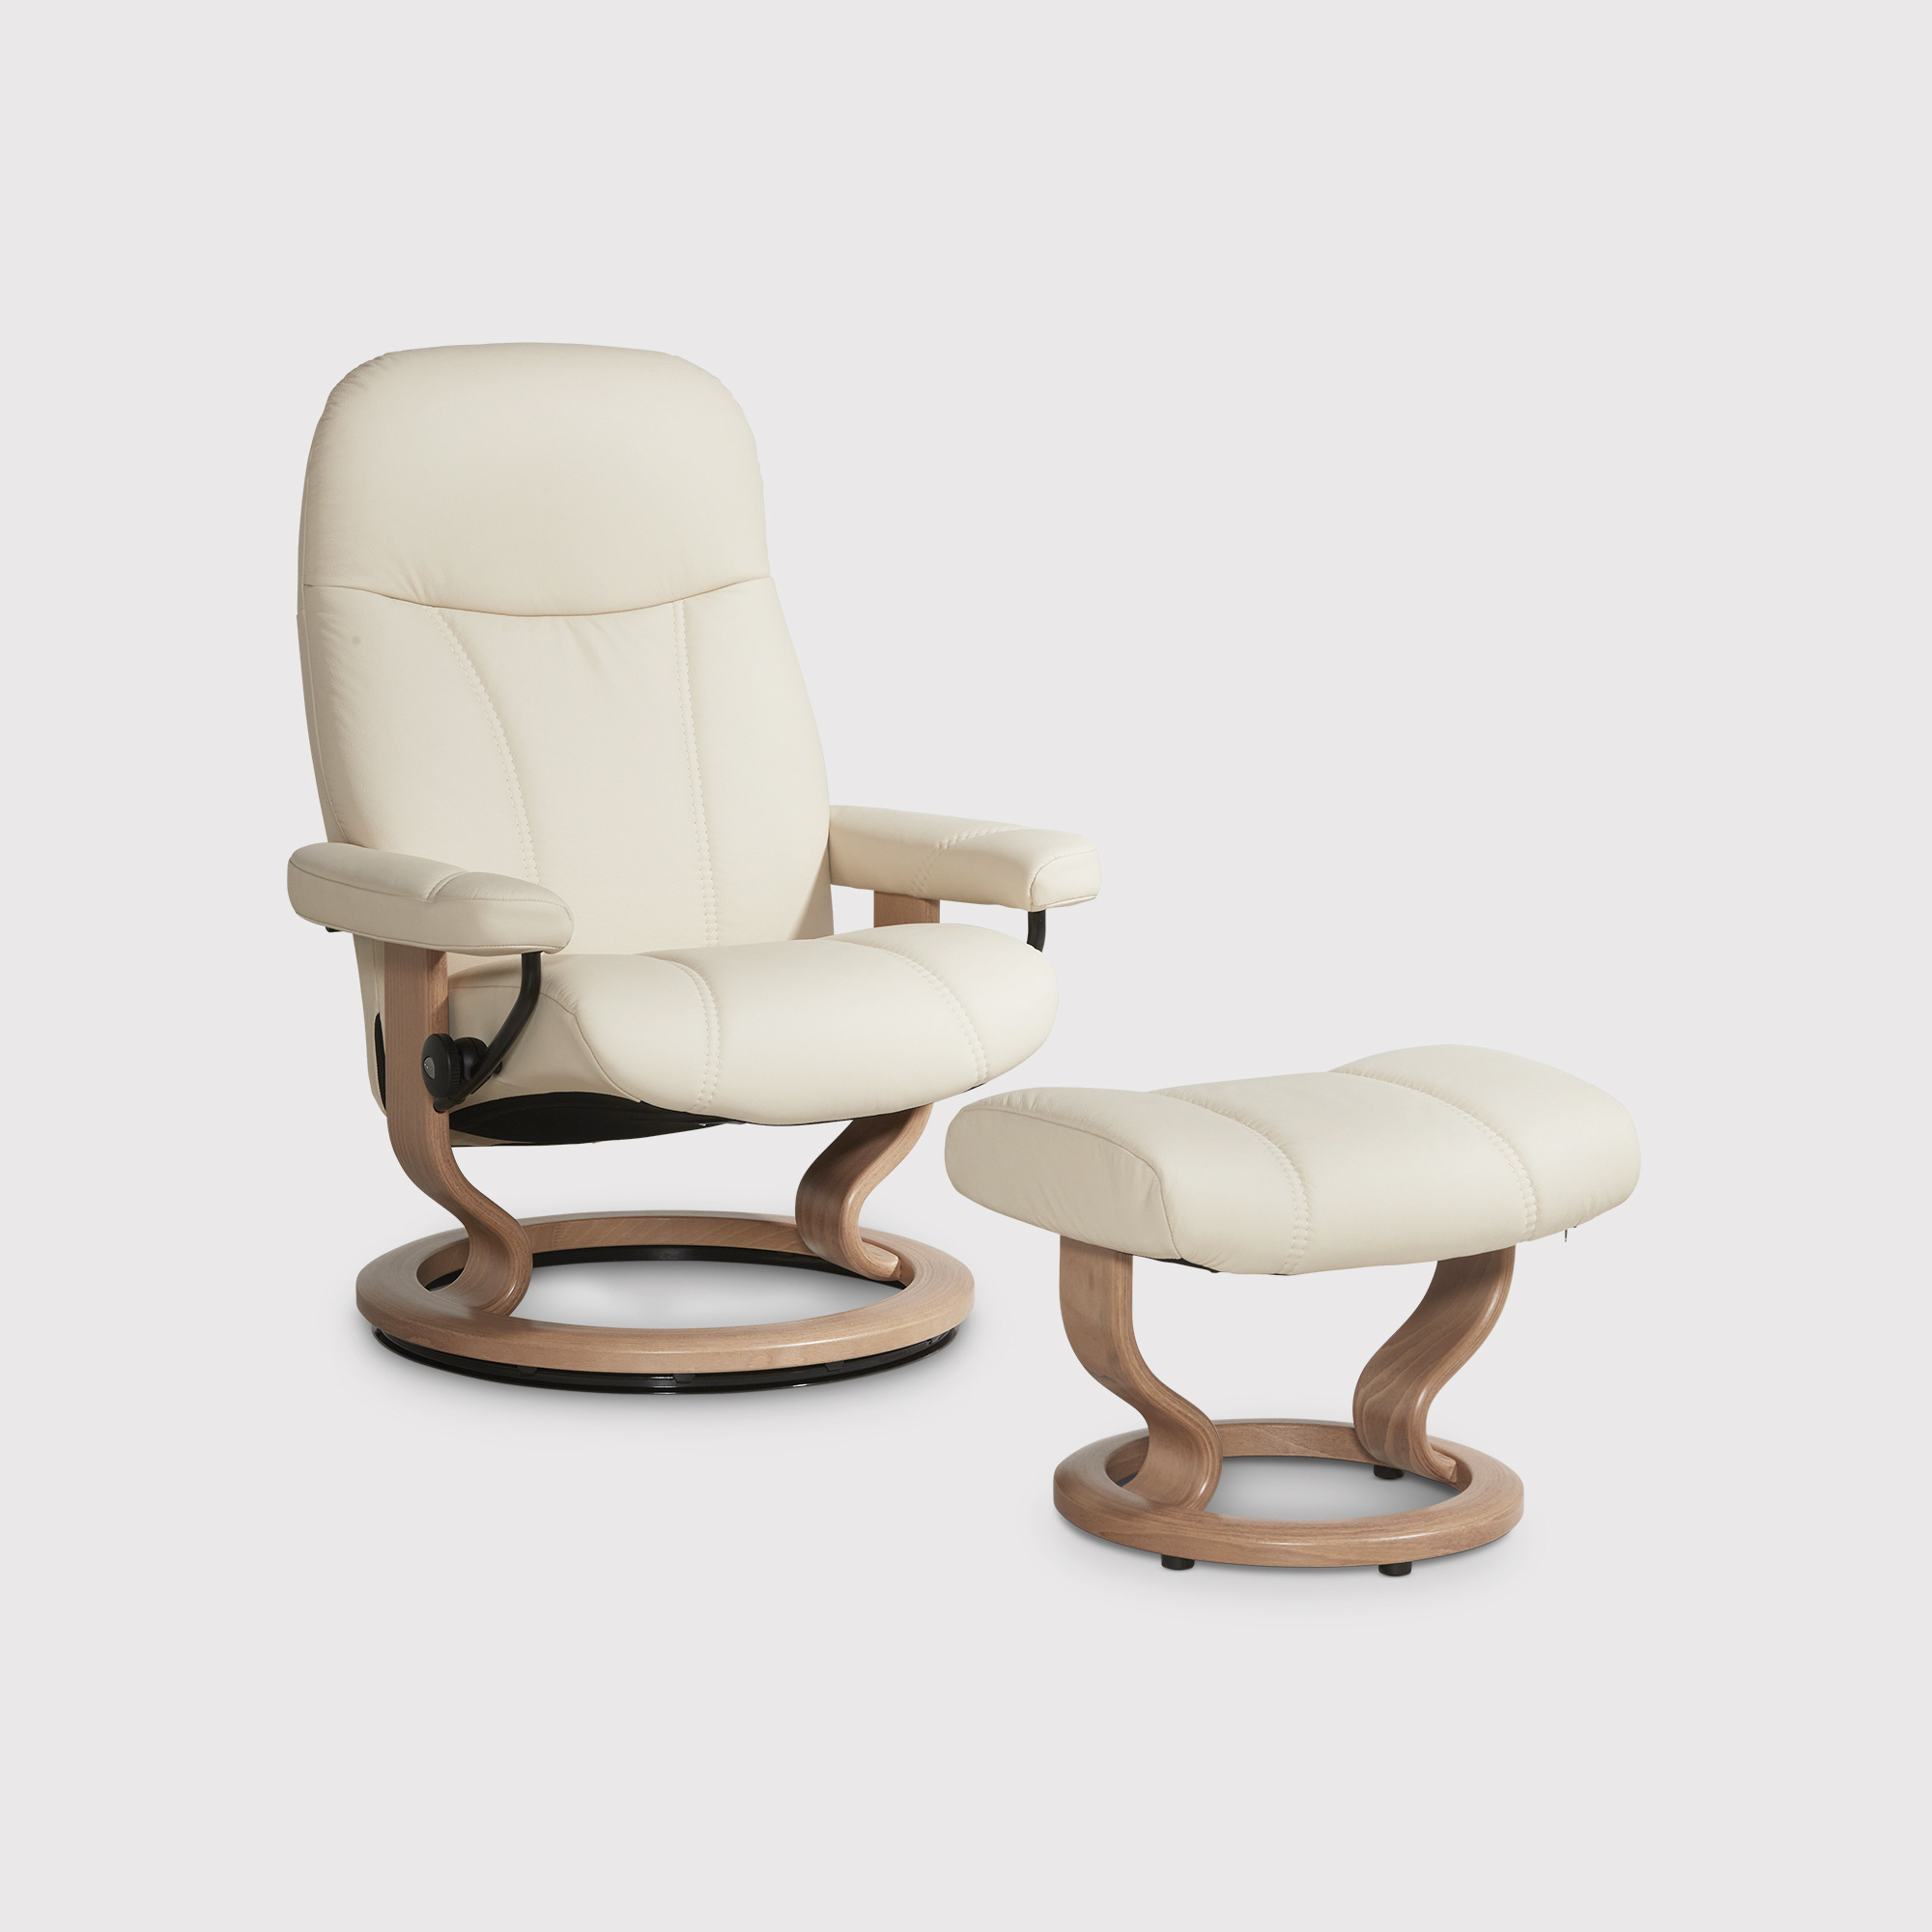 Stressless Consul Medium Recliner Chair & Stool, Neutral Leather - Barker & Stonehouse - image 1